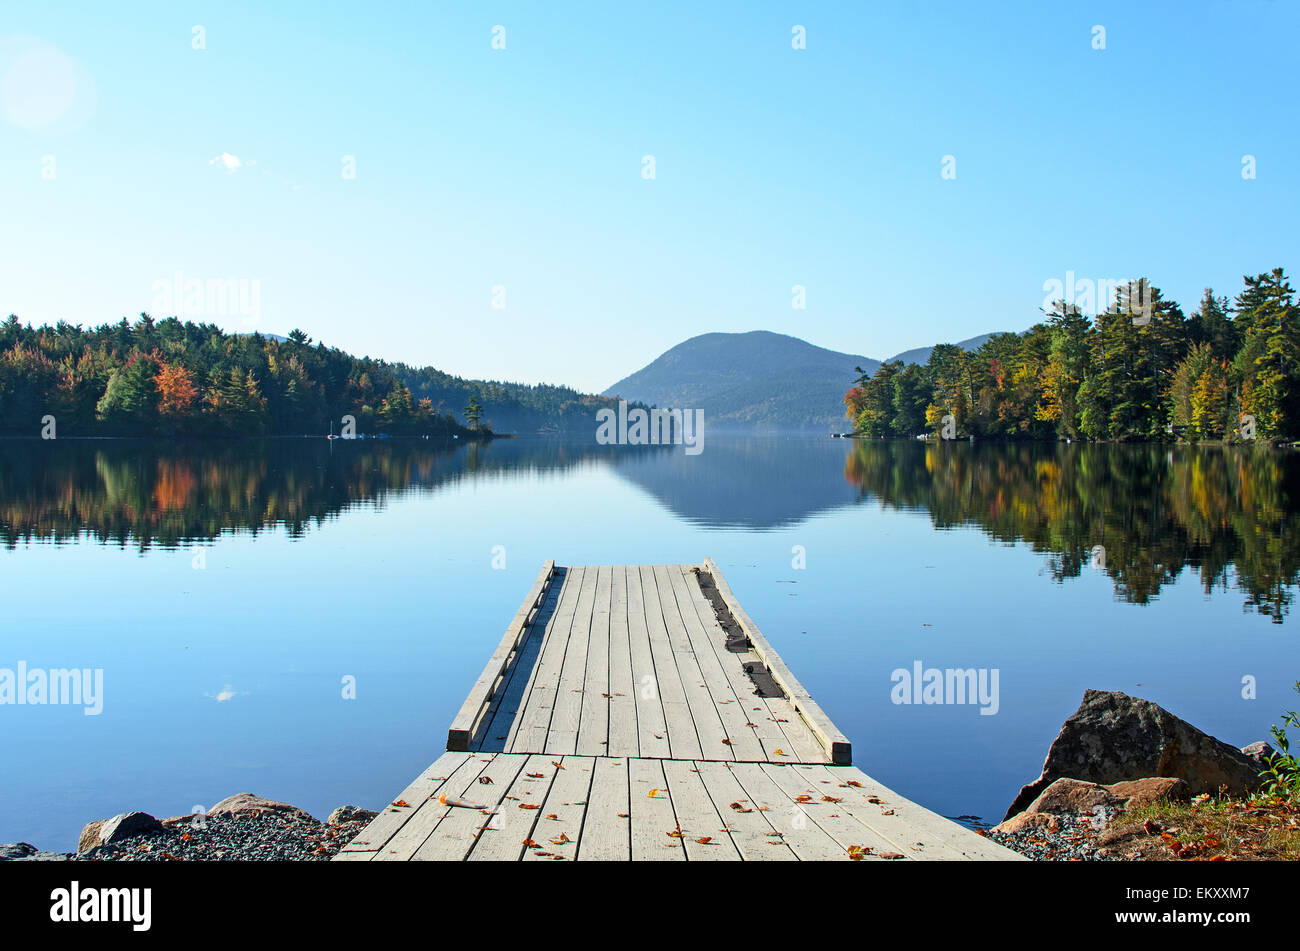 Looking over the dock at fall foliage reflected in the still waters of Long Pond on Mount Desert Island, Maine. Stock Photo